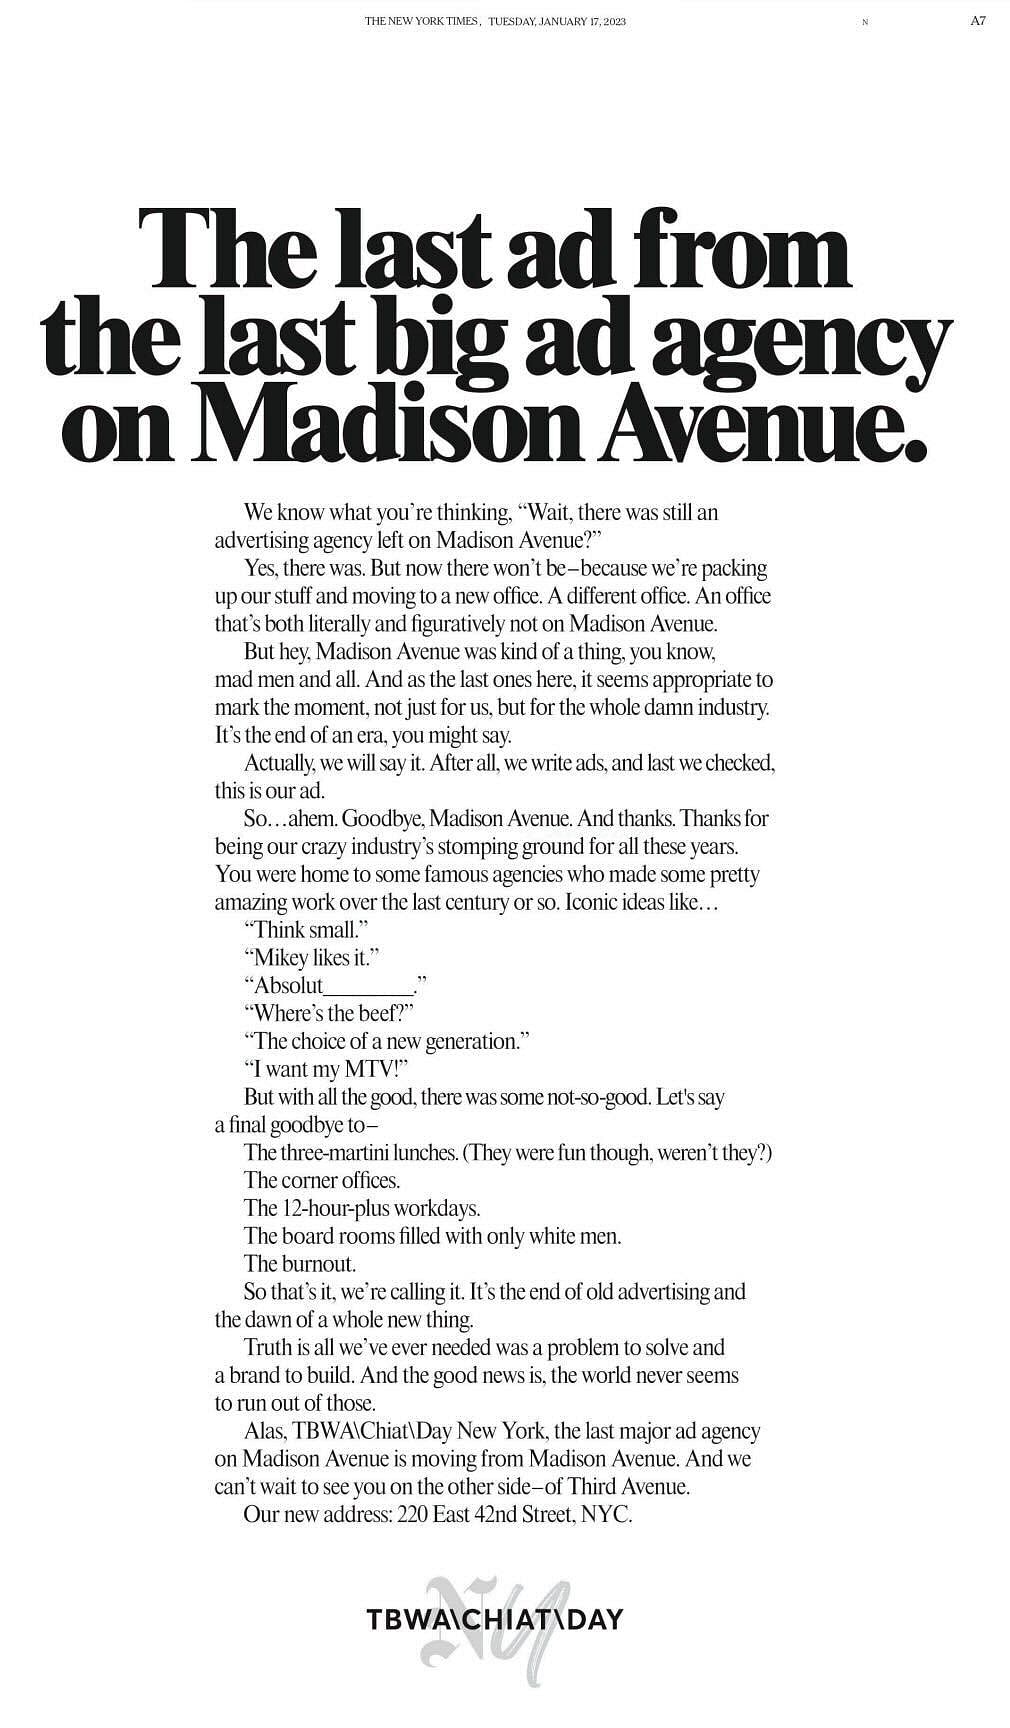 TBWA\Chiat\Day ad in NYT